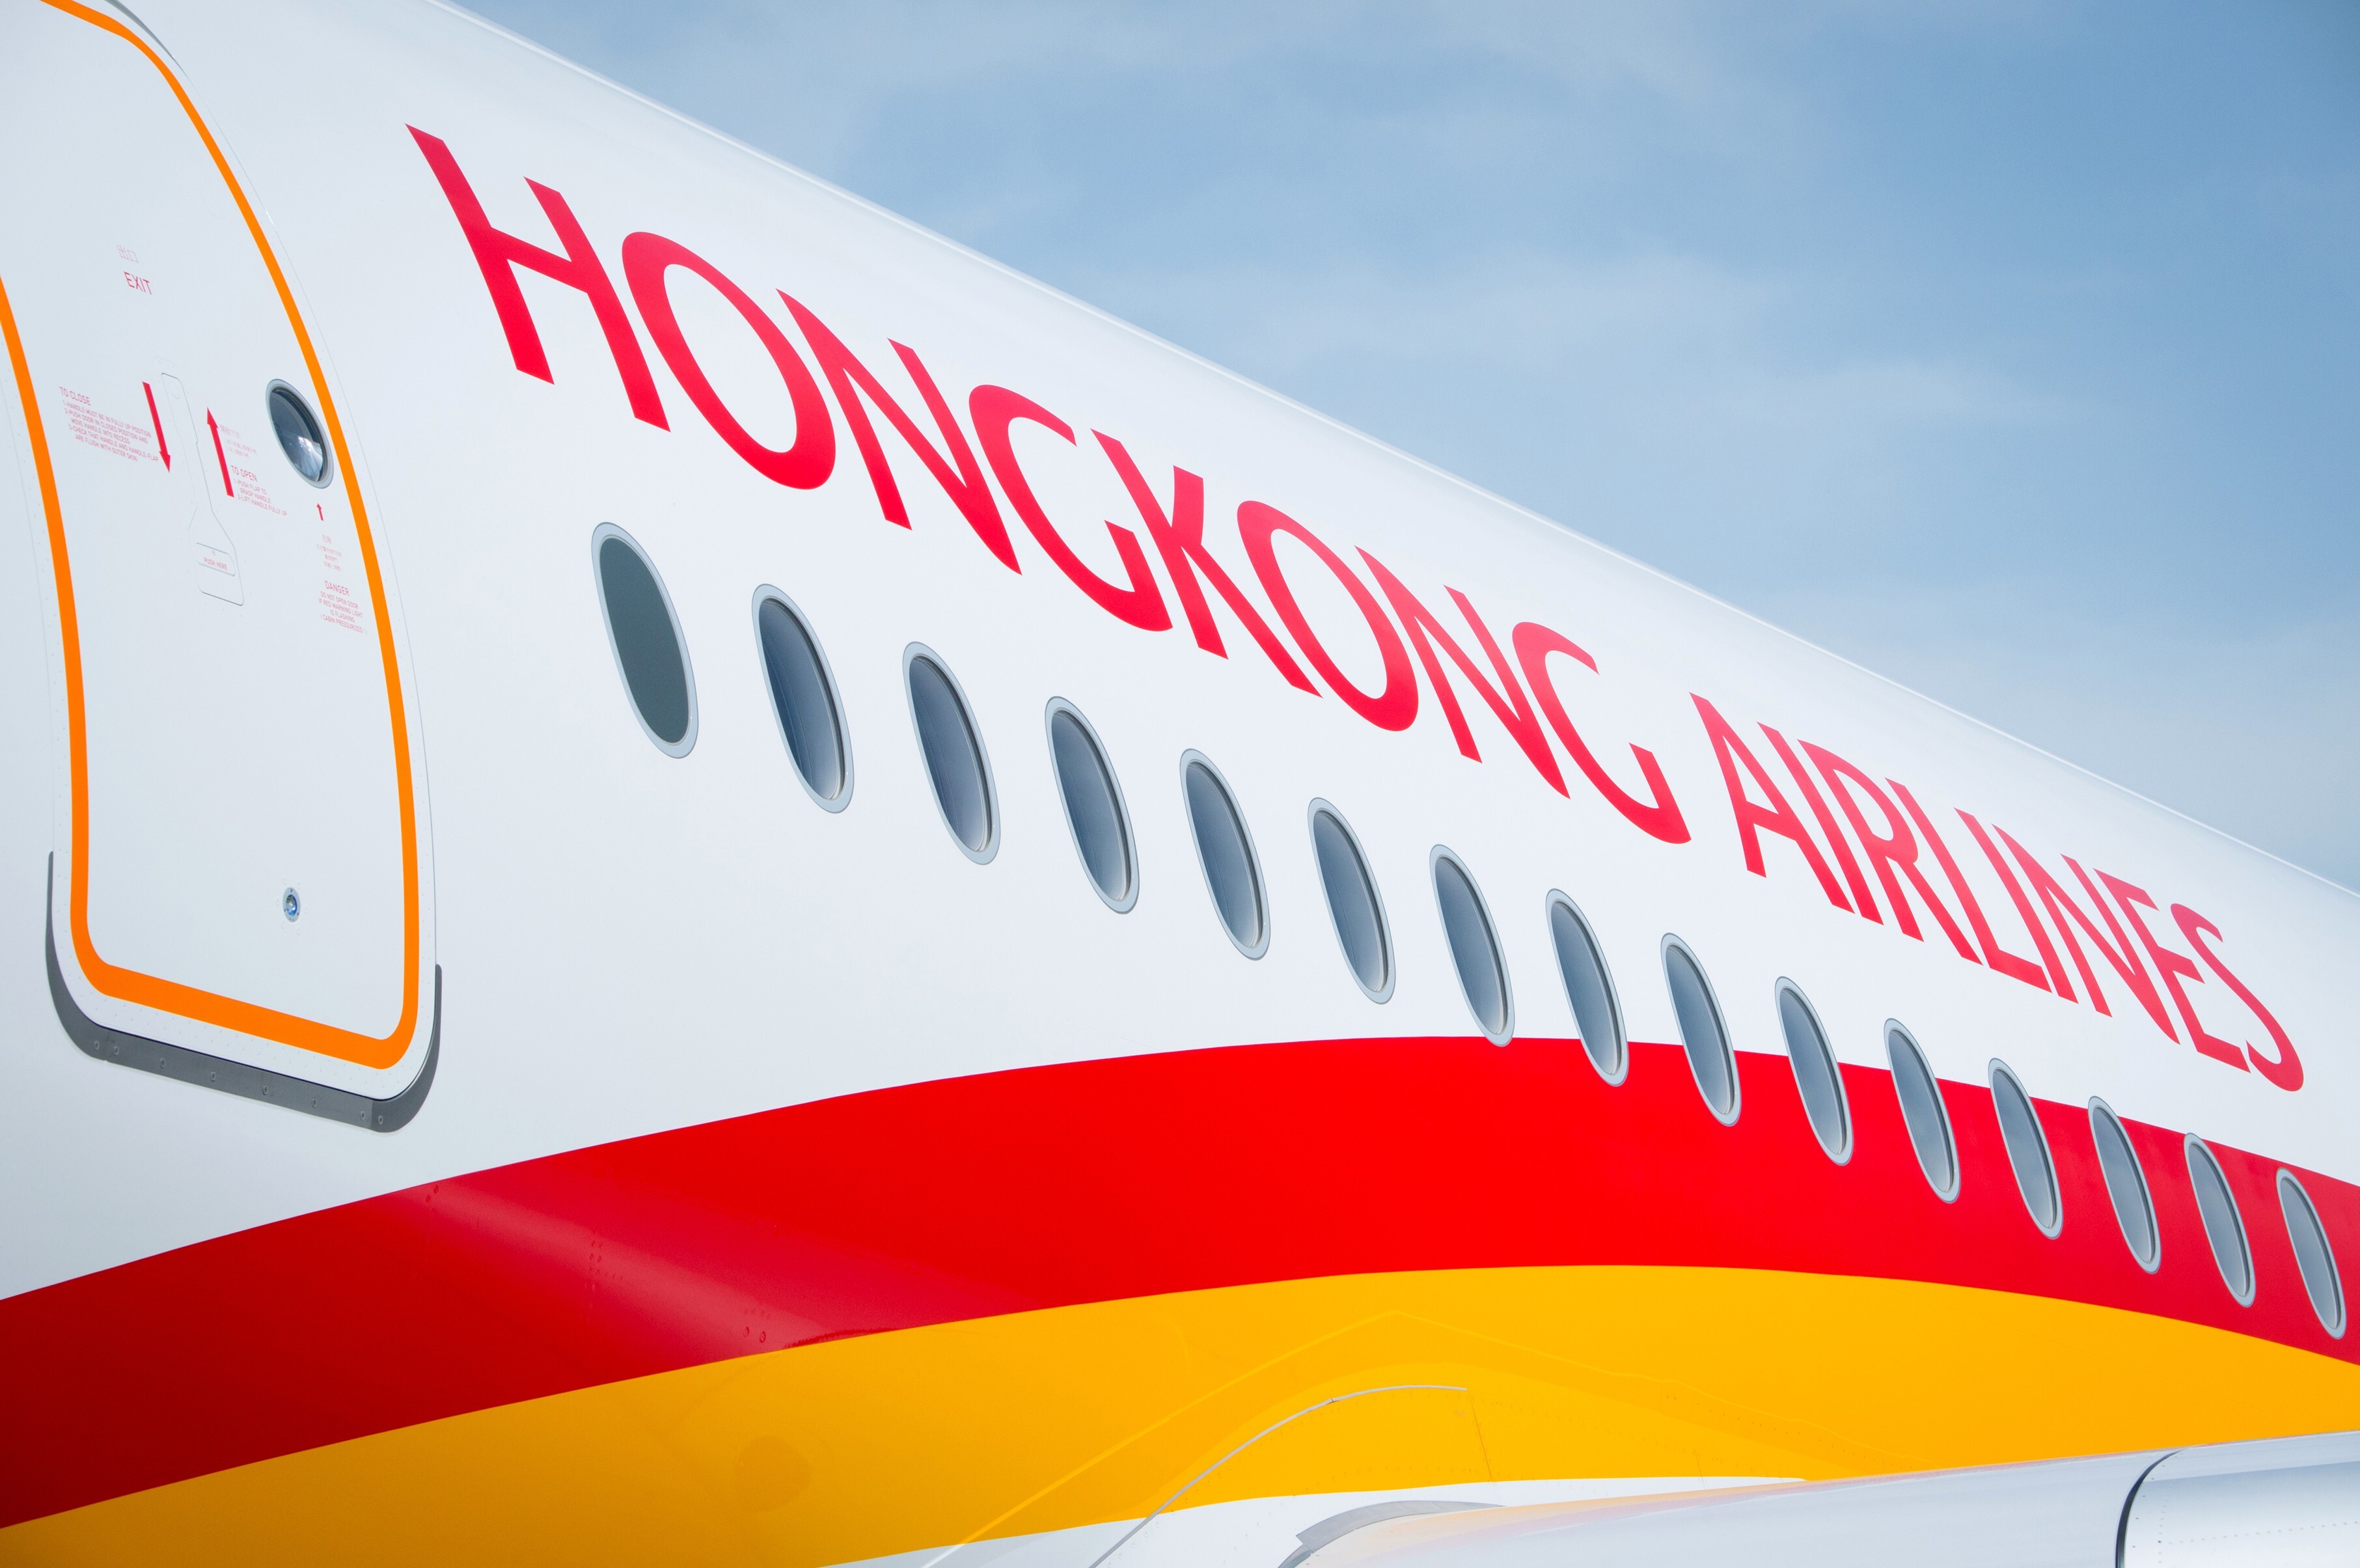 Hong Kong Airlines plans to ground a significant number of planes and use those still flying to carry primarily cargo. Photo: Airbus